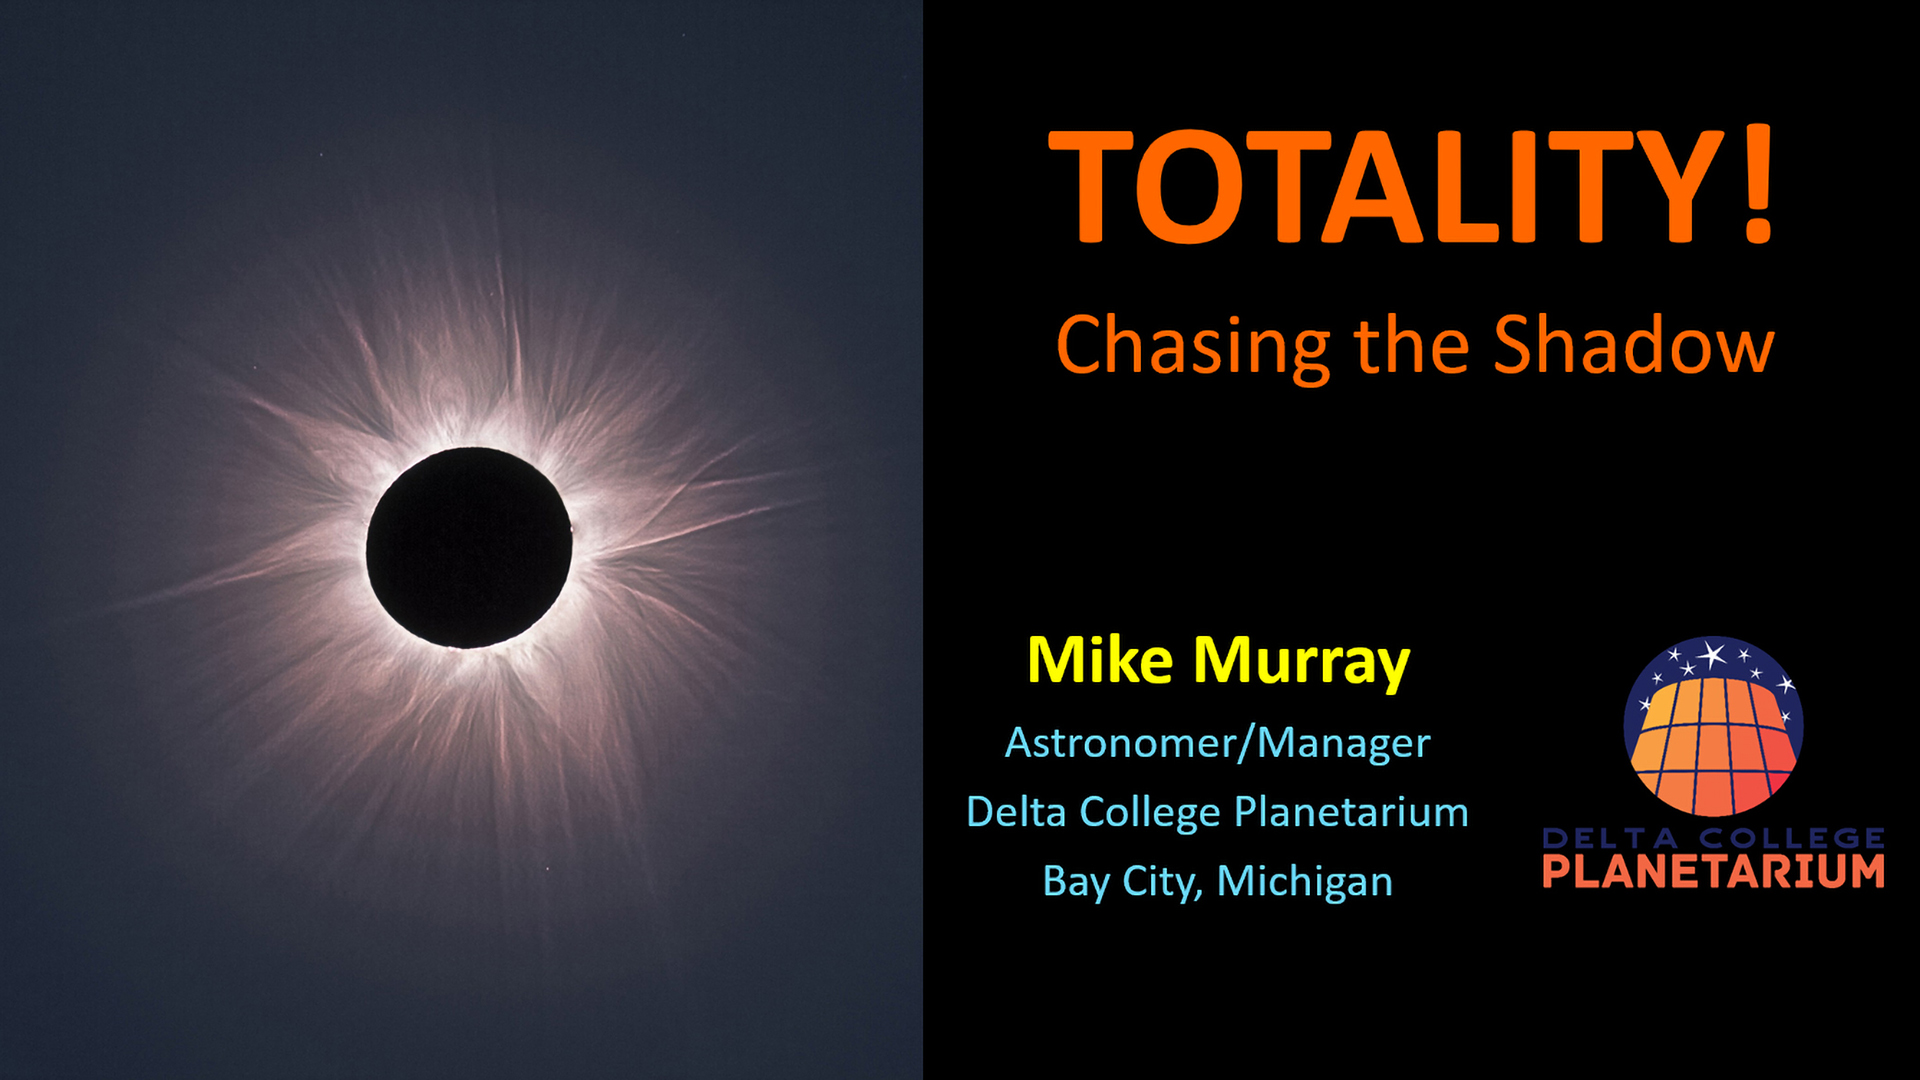 Totality! Chasing the Shadow with Mike Murray